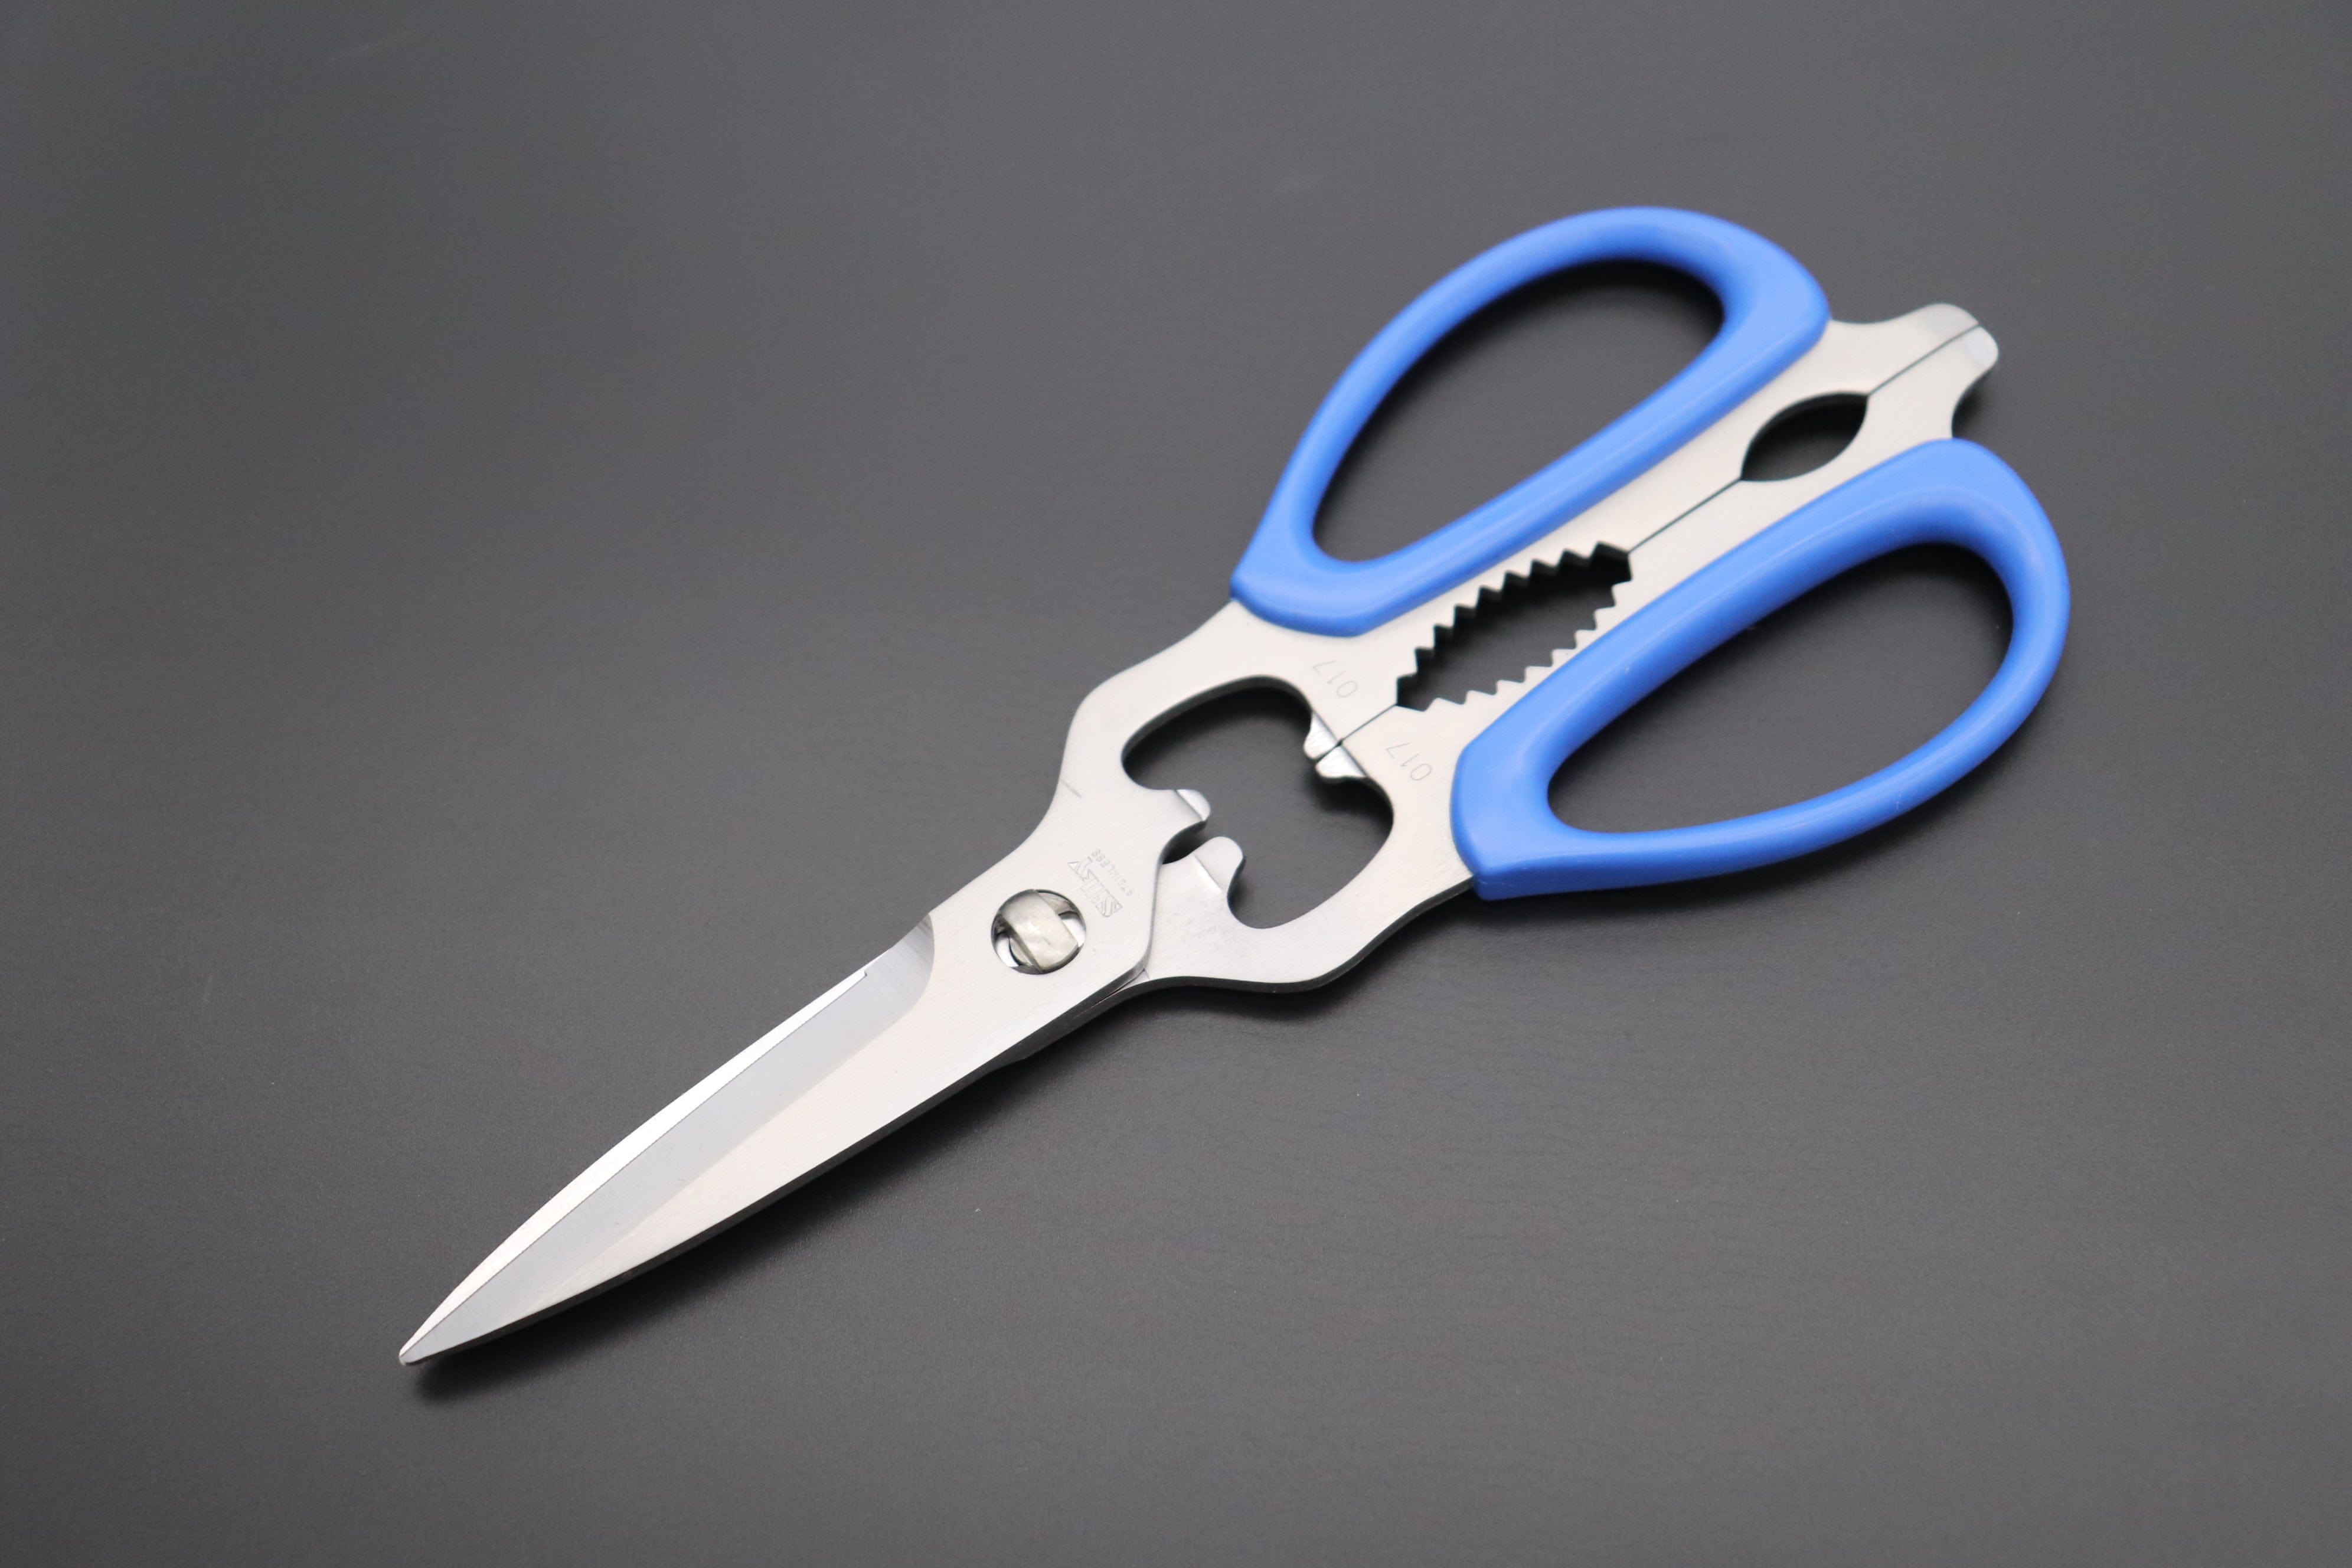 The Best Kitchen Shears, According to a Chef